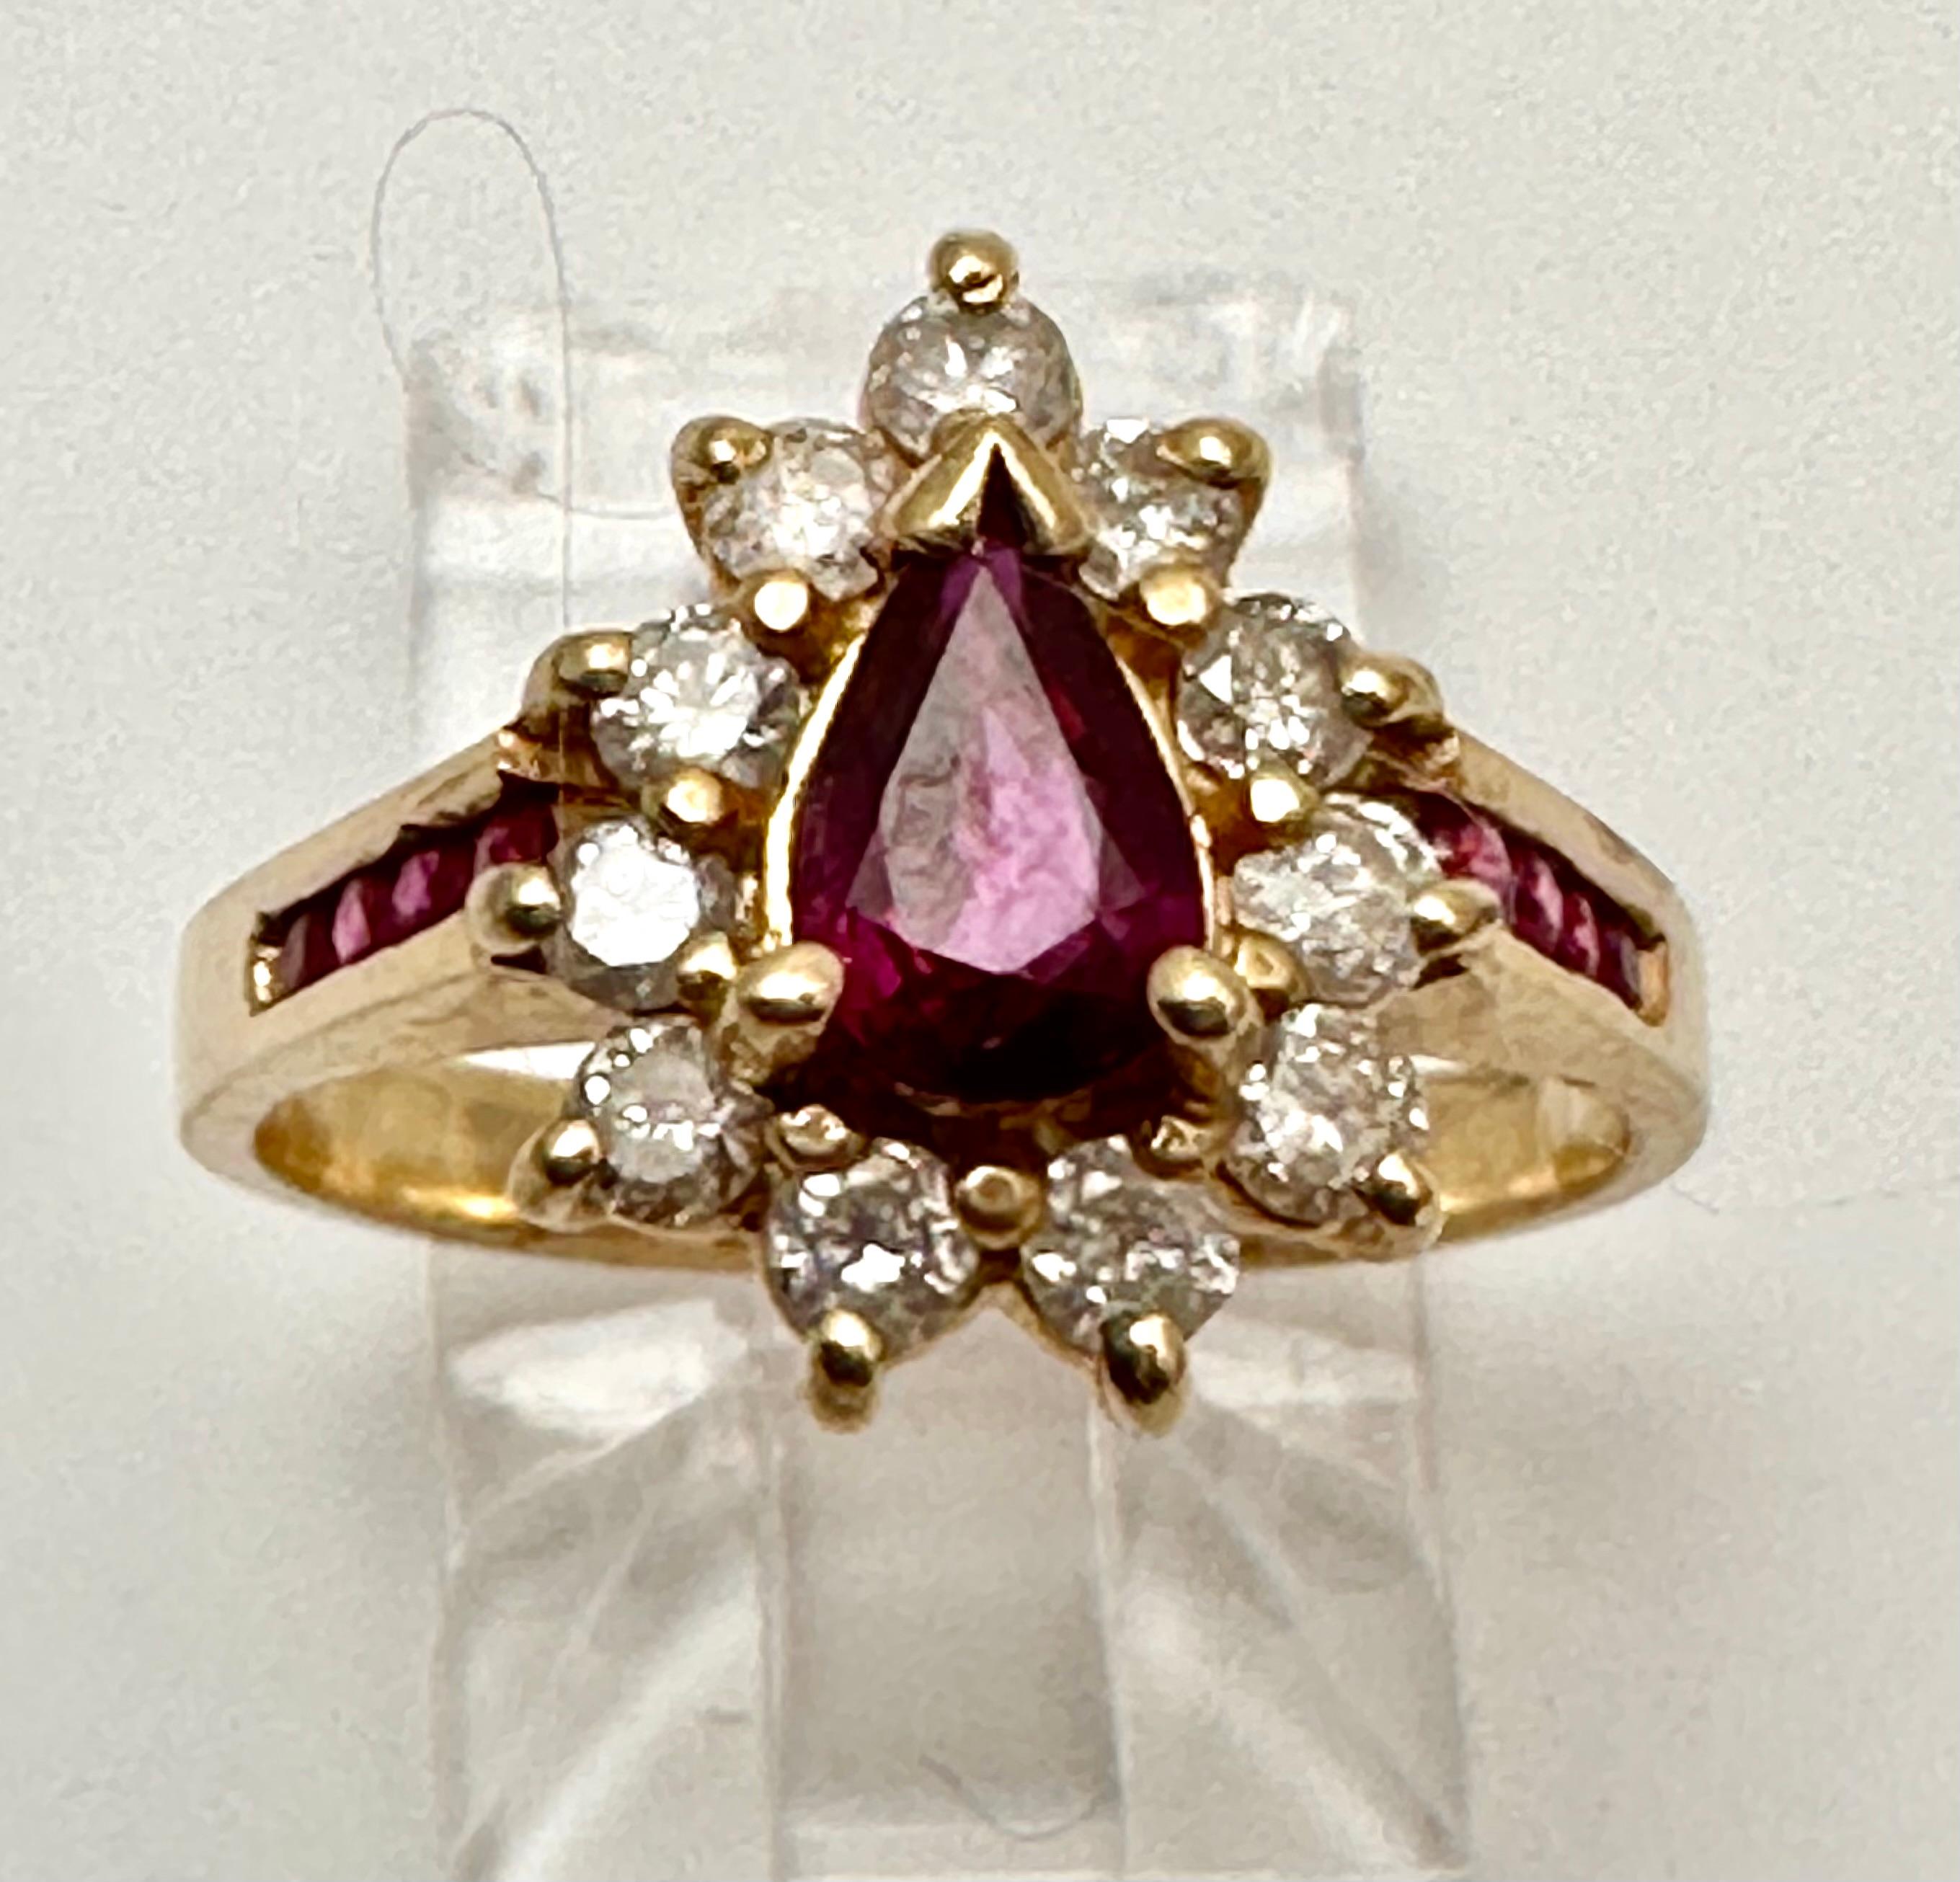 14k Yellow Gold approx. 5mm x 7mm Pear Shape Ruby with 11 surrounding approx. 2.5 - 3mm Round Diamonds. Eight round channel set rubies, 4 on each side.
Ring Size 6 1/2

The ruby is known as a protective stone that can bring happiness and passion